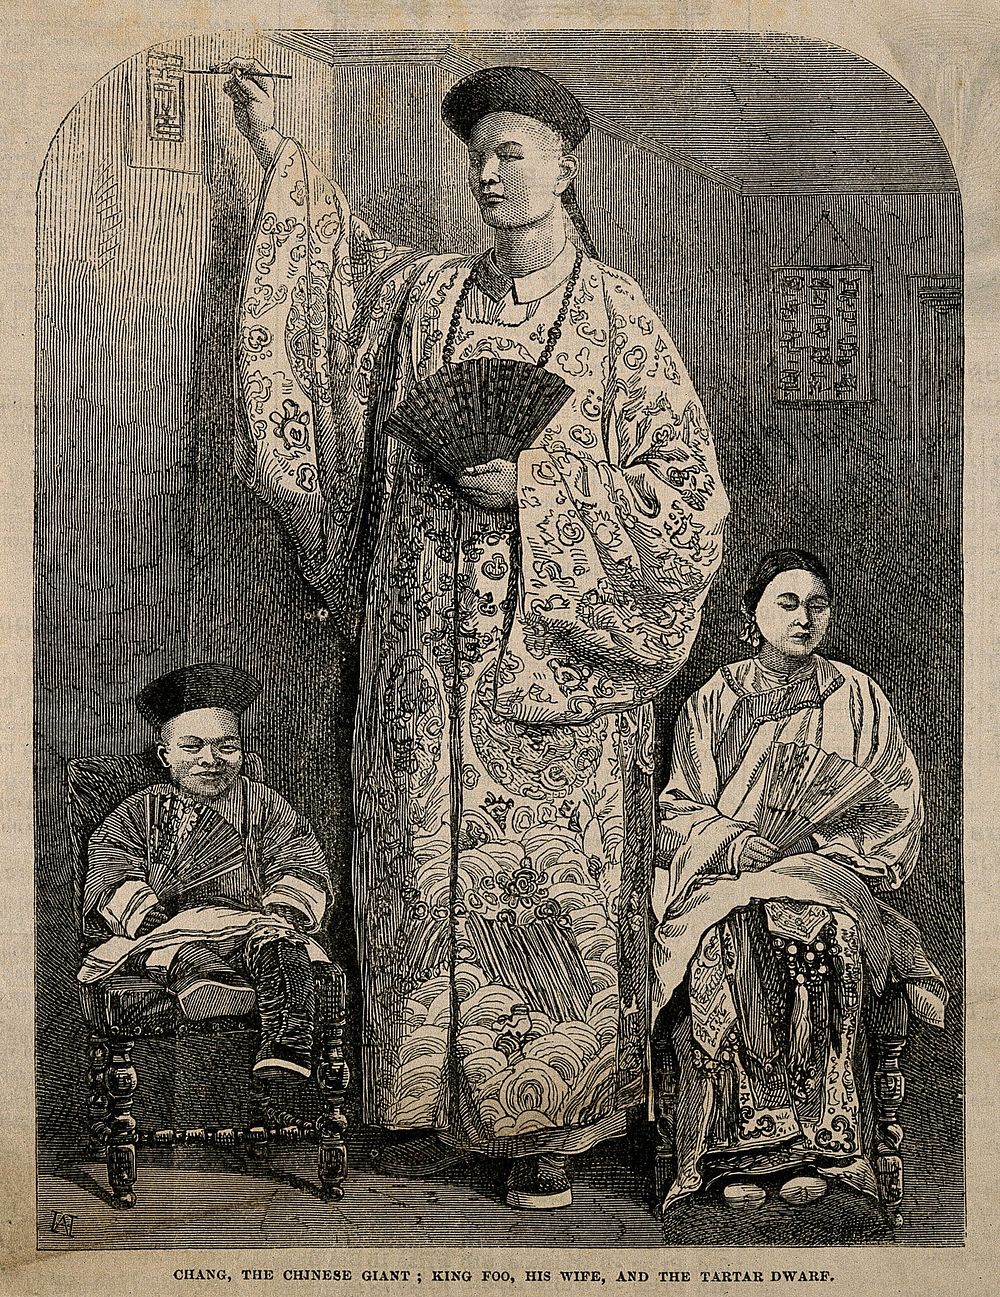 Chang Yu-sing the Chinese giant, with his wife King-Foo,and Chung Mow, a dwarf. Wood engraving.